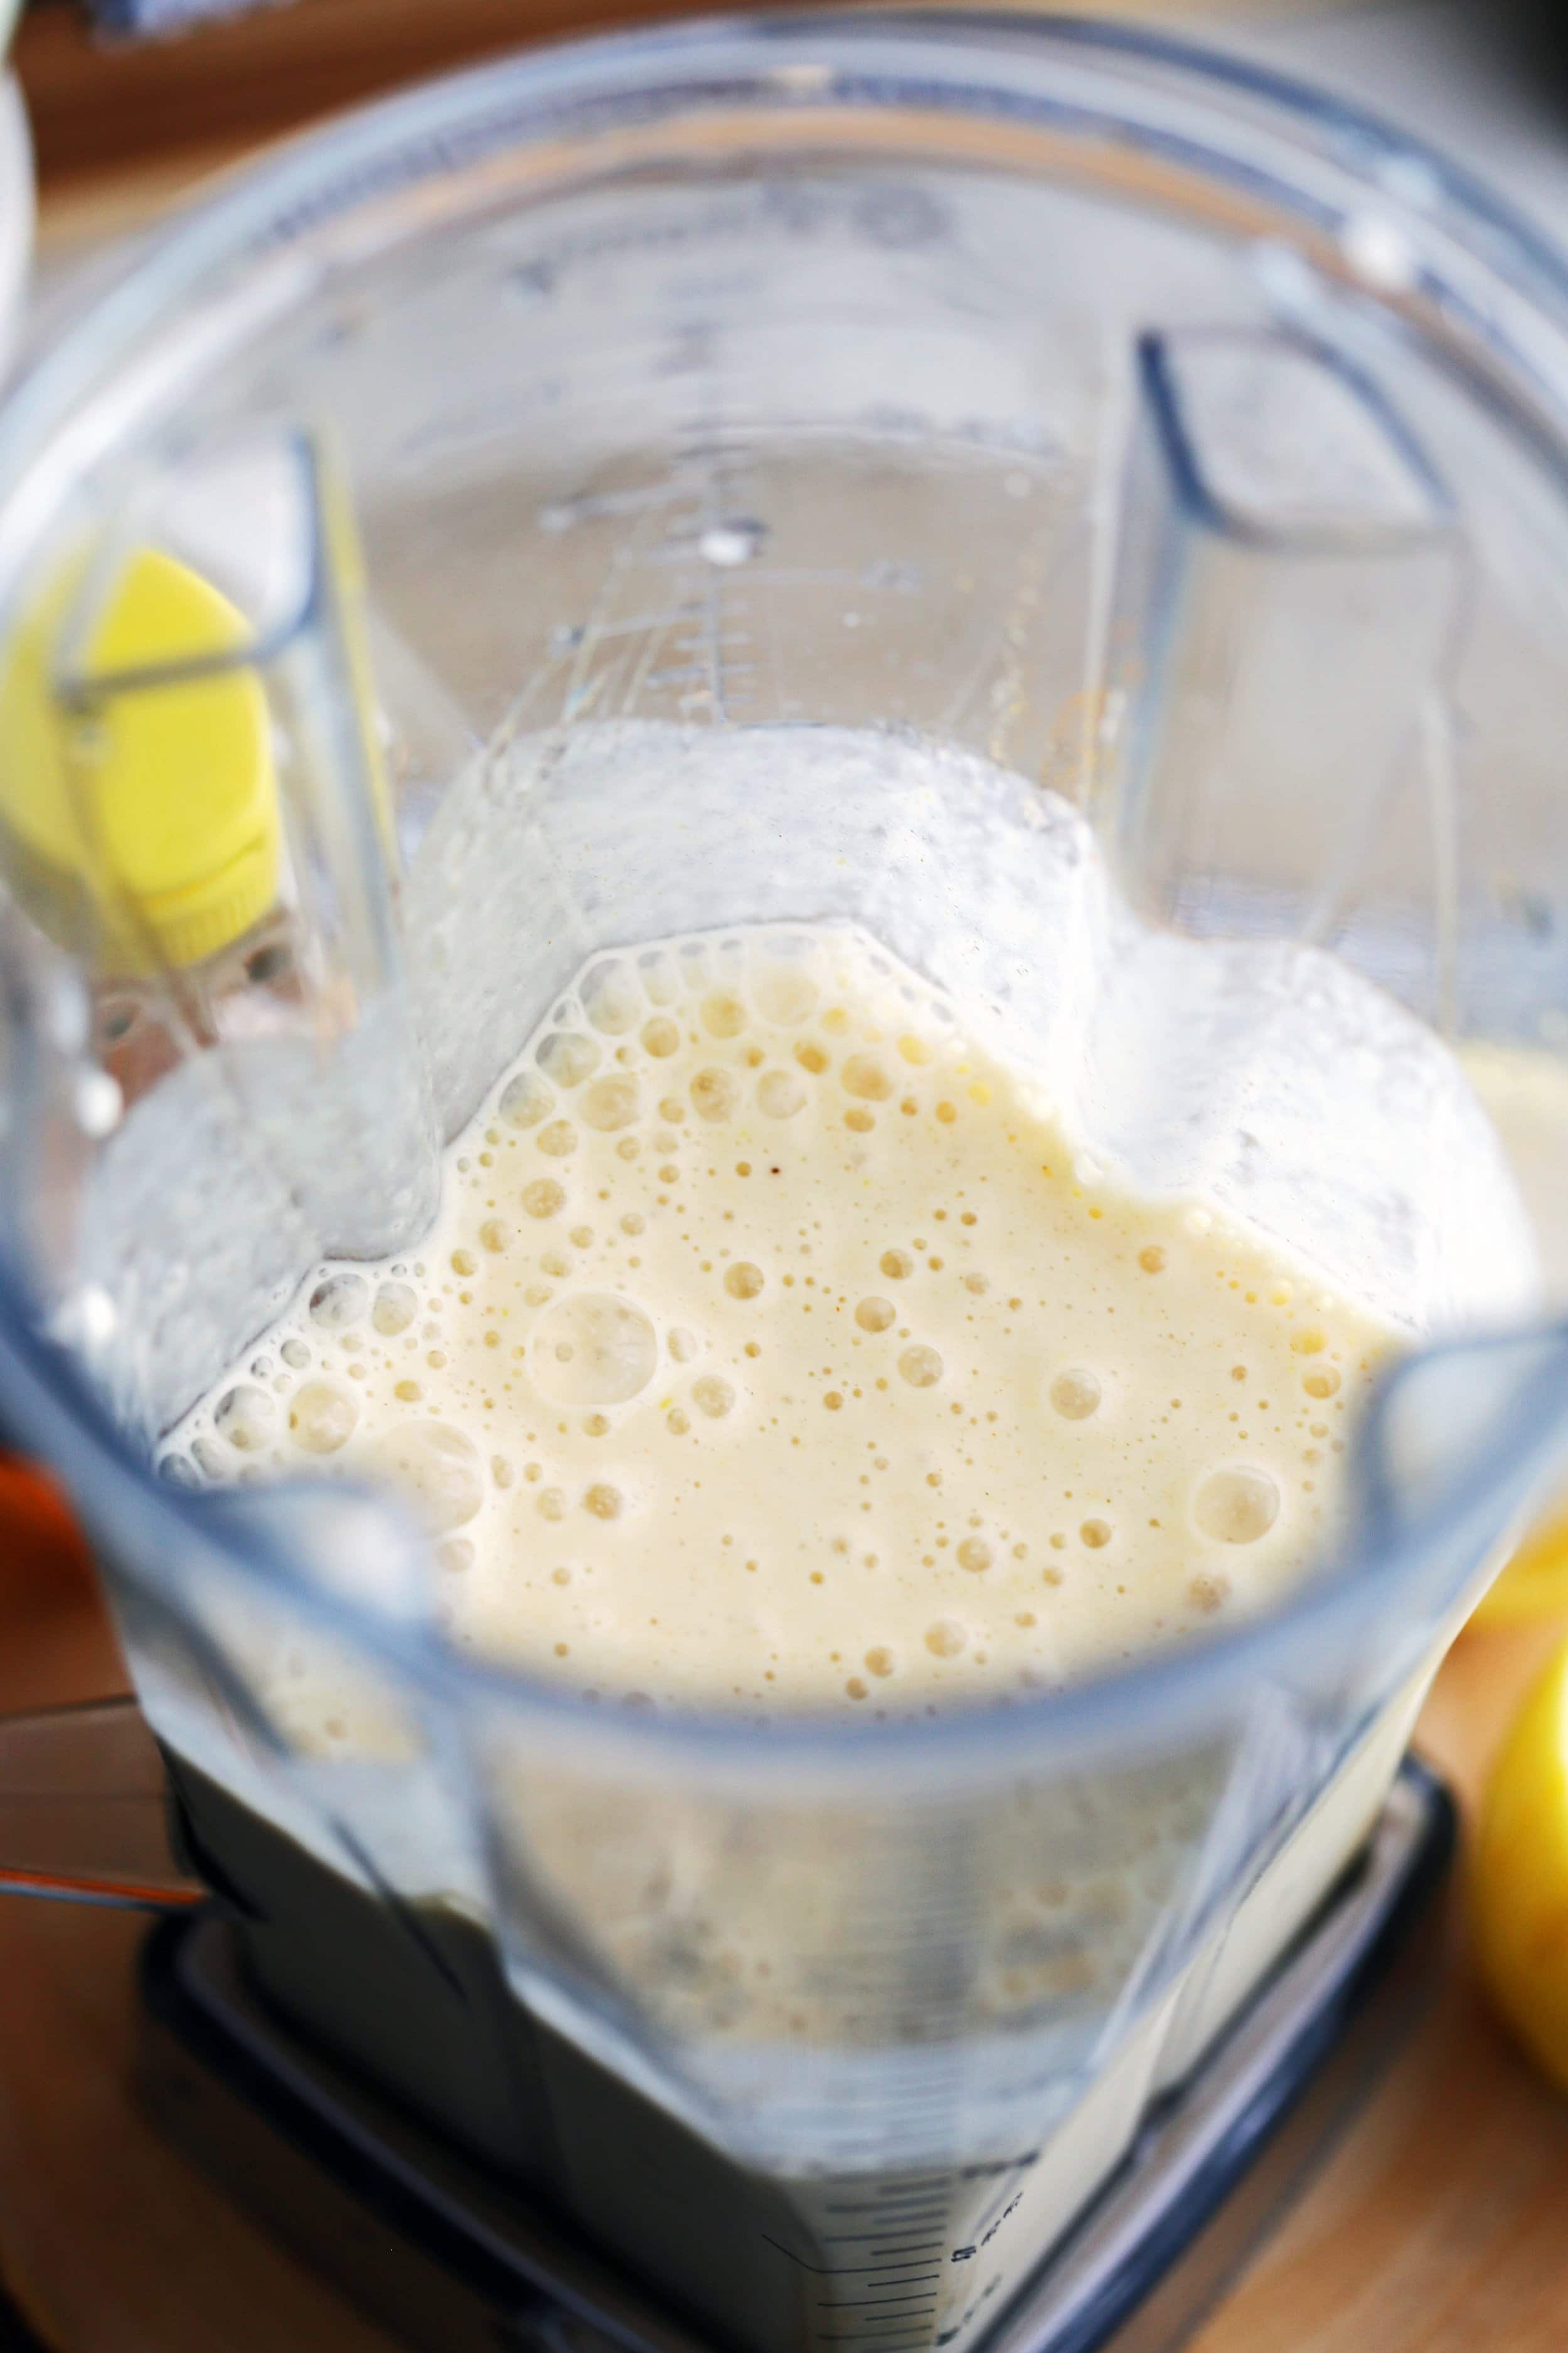 Creamy Lemon Pineapple Smoothie just blended in a large blender container.